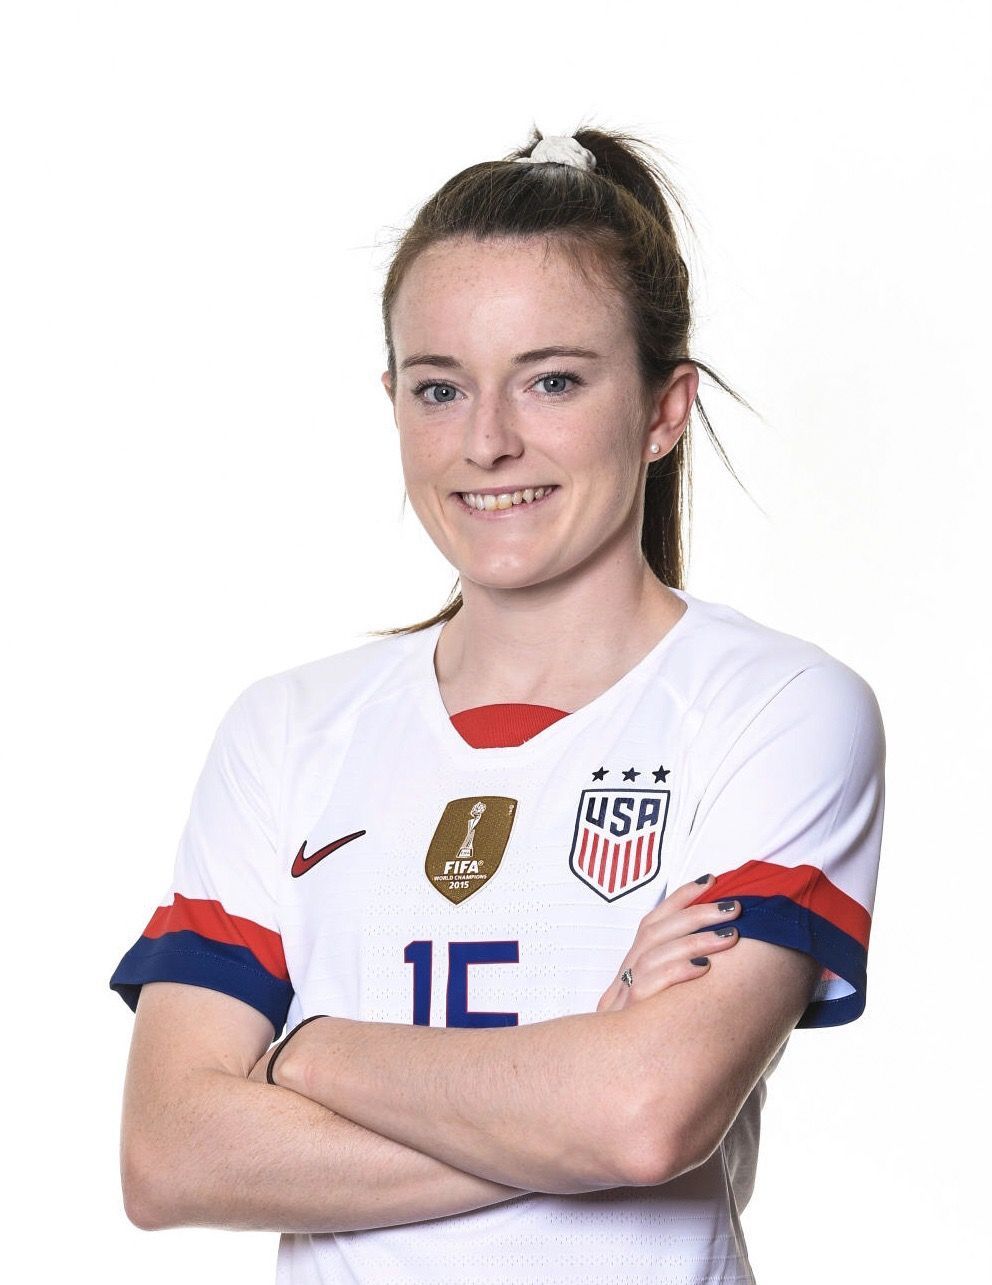 Rose Lavelle # USWNT, Official FIFA Women's World Cup 2019 Portrait. Women's soccer, Uswnt, Good soccer players